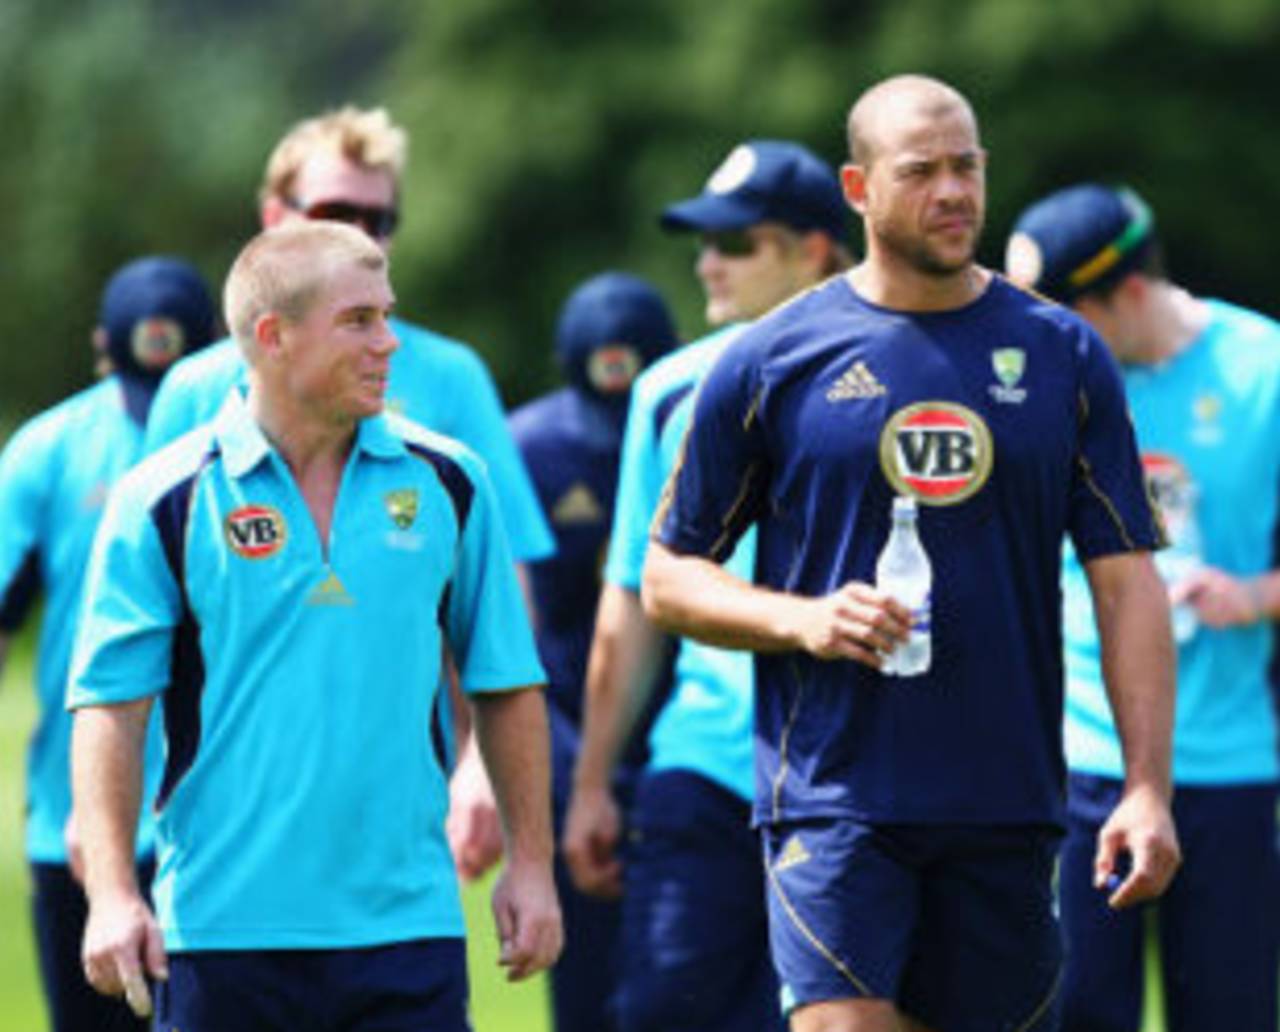 David Warner and Andrew Symonds at a training session, Nottingham, May 29, 2009